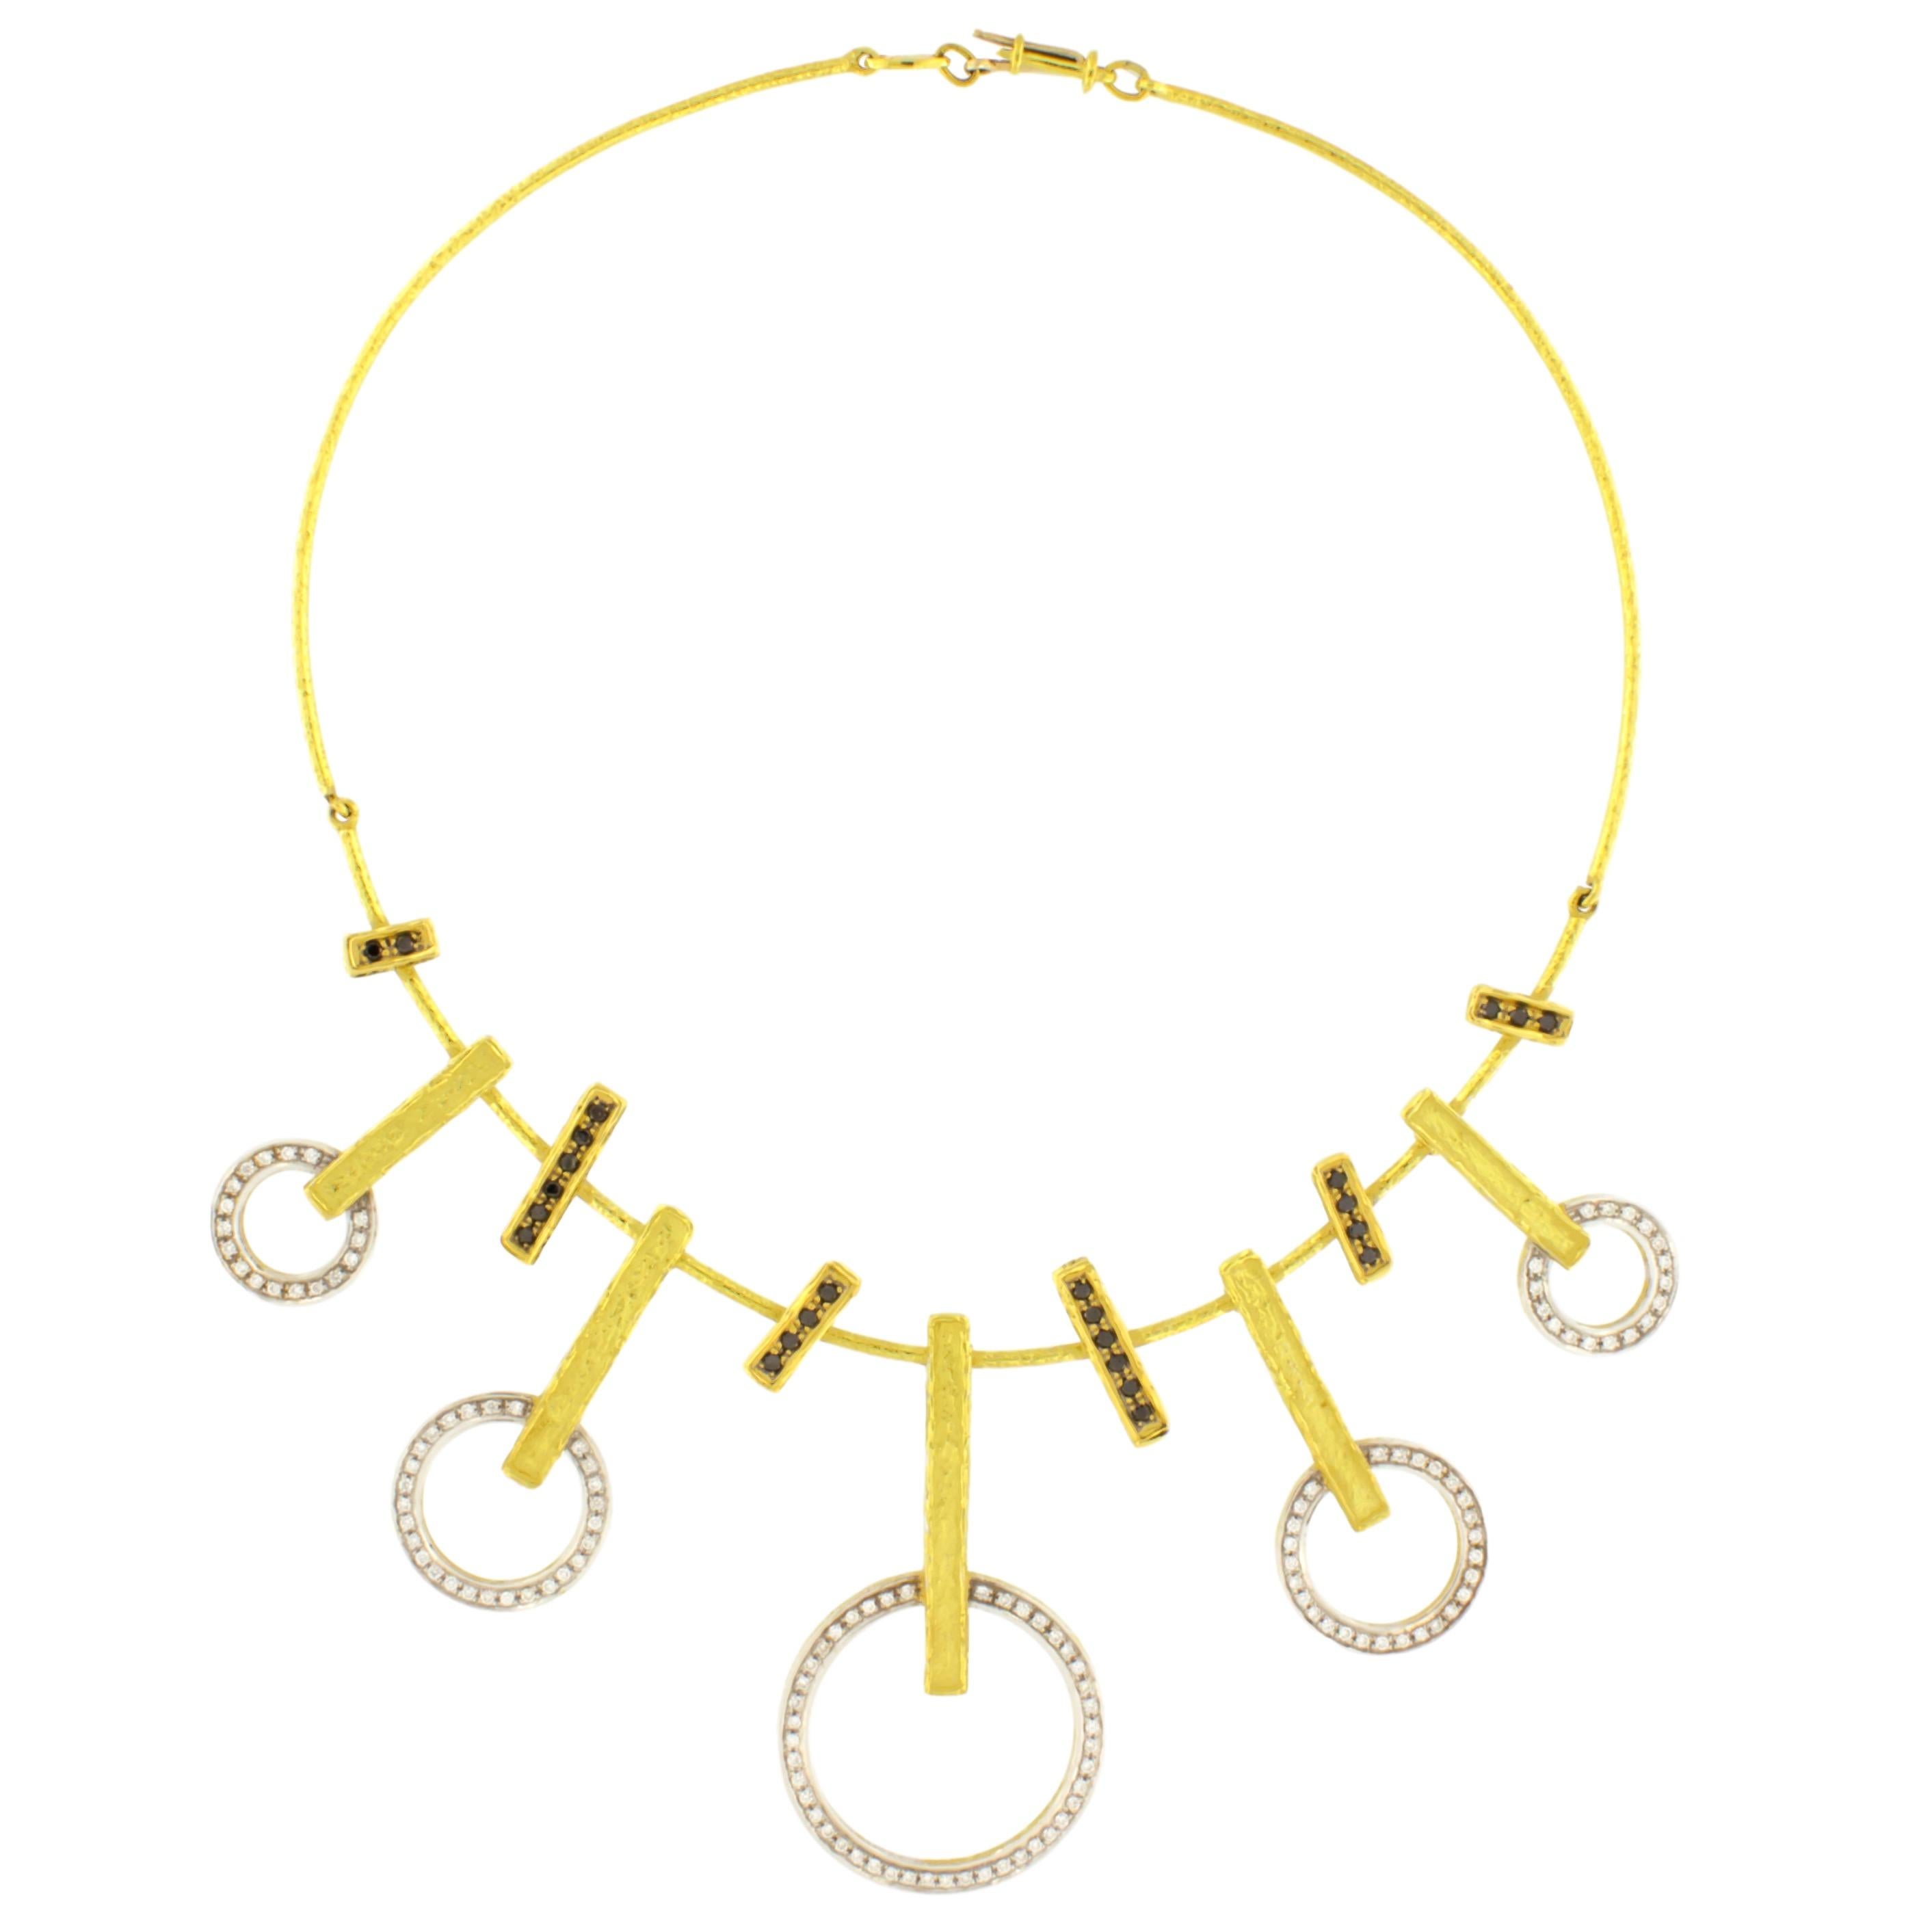 18 Karat Yellow Gold Necklace  embellished with Black and White Diamonds, from Sacchi’s 